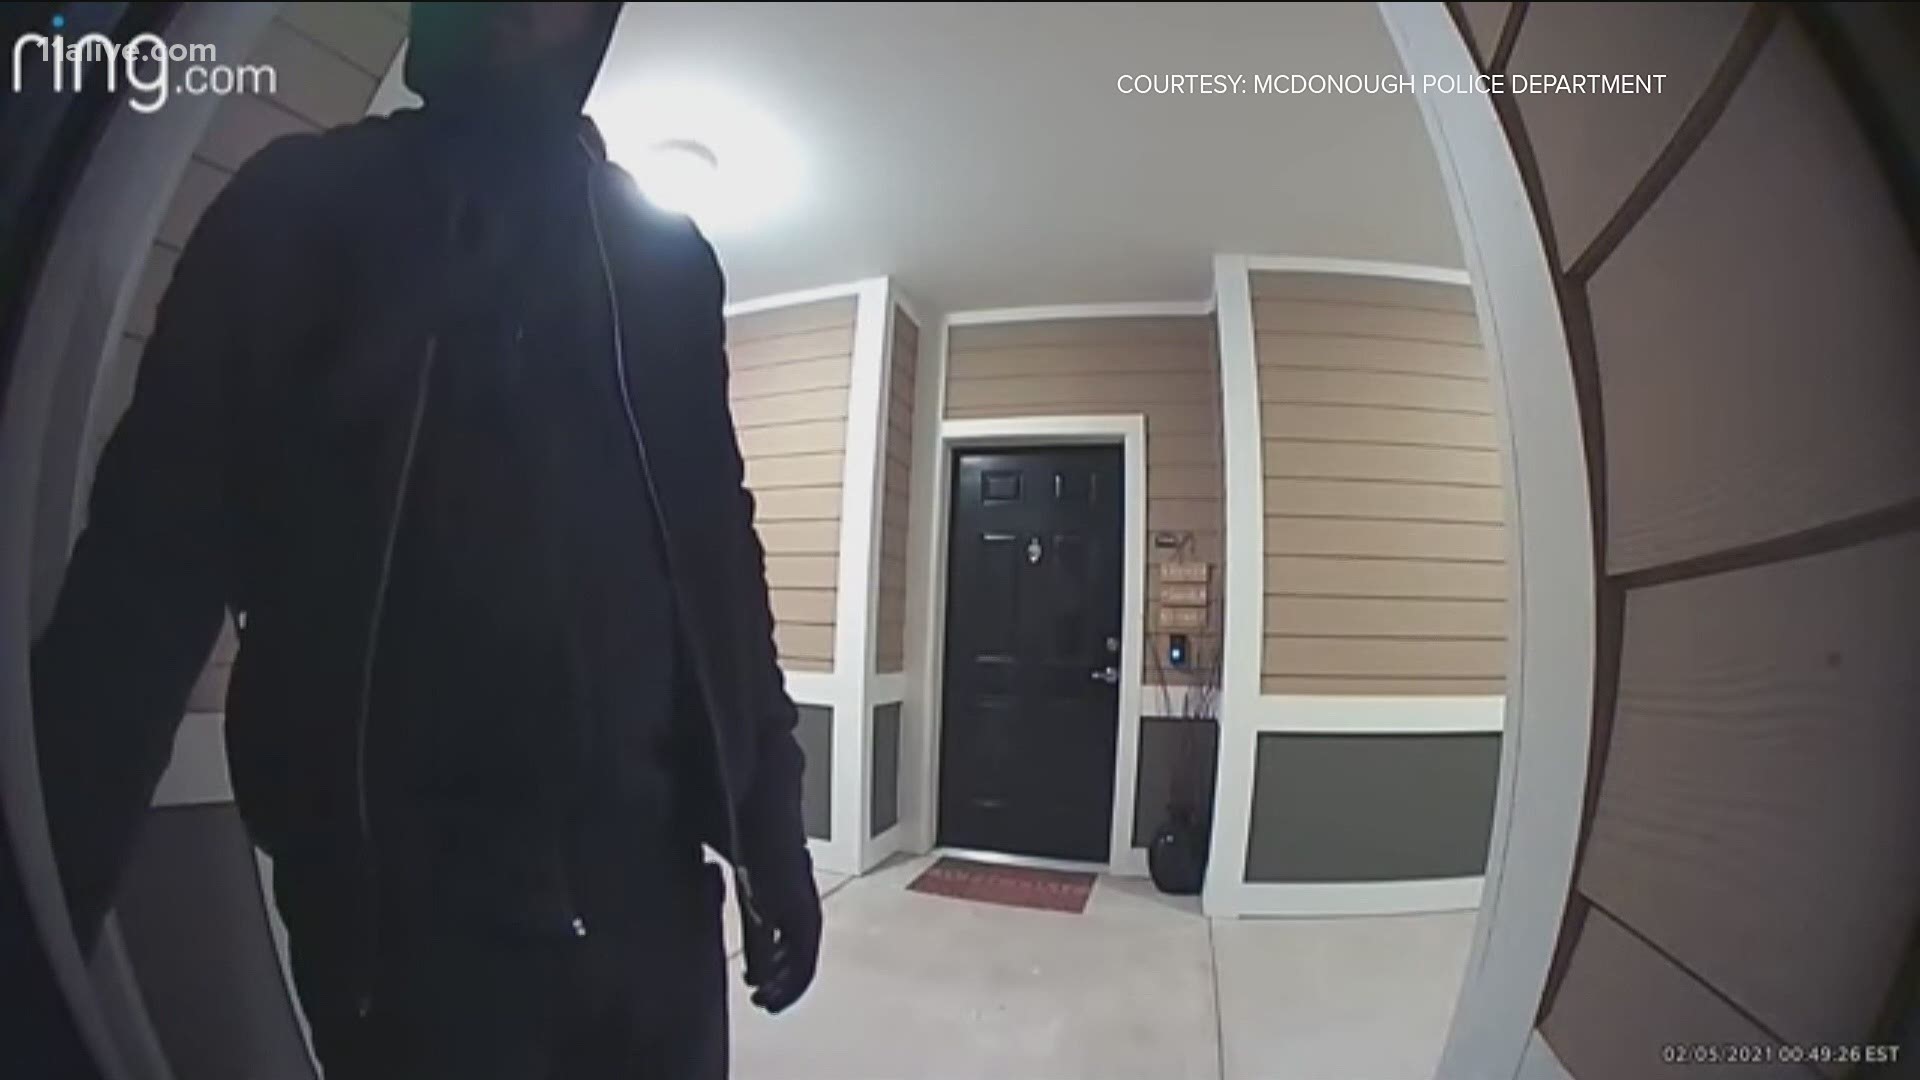 Police shared video of the suspect checking doors at a facility. They said that he went inside when he found one door open and assaulted a resident.